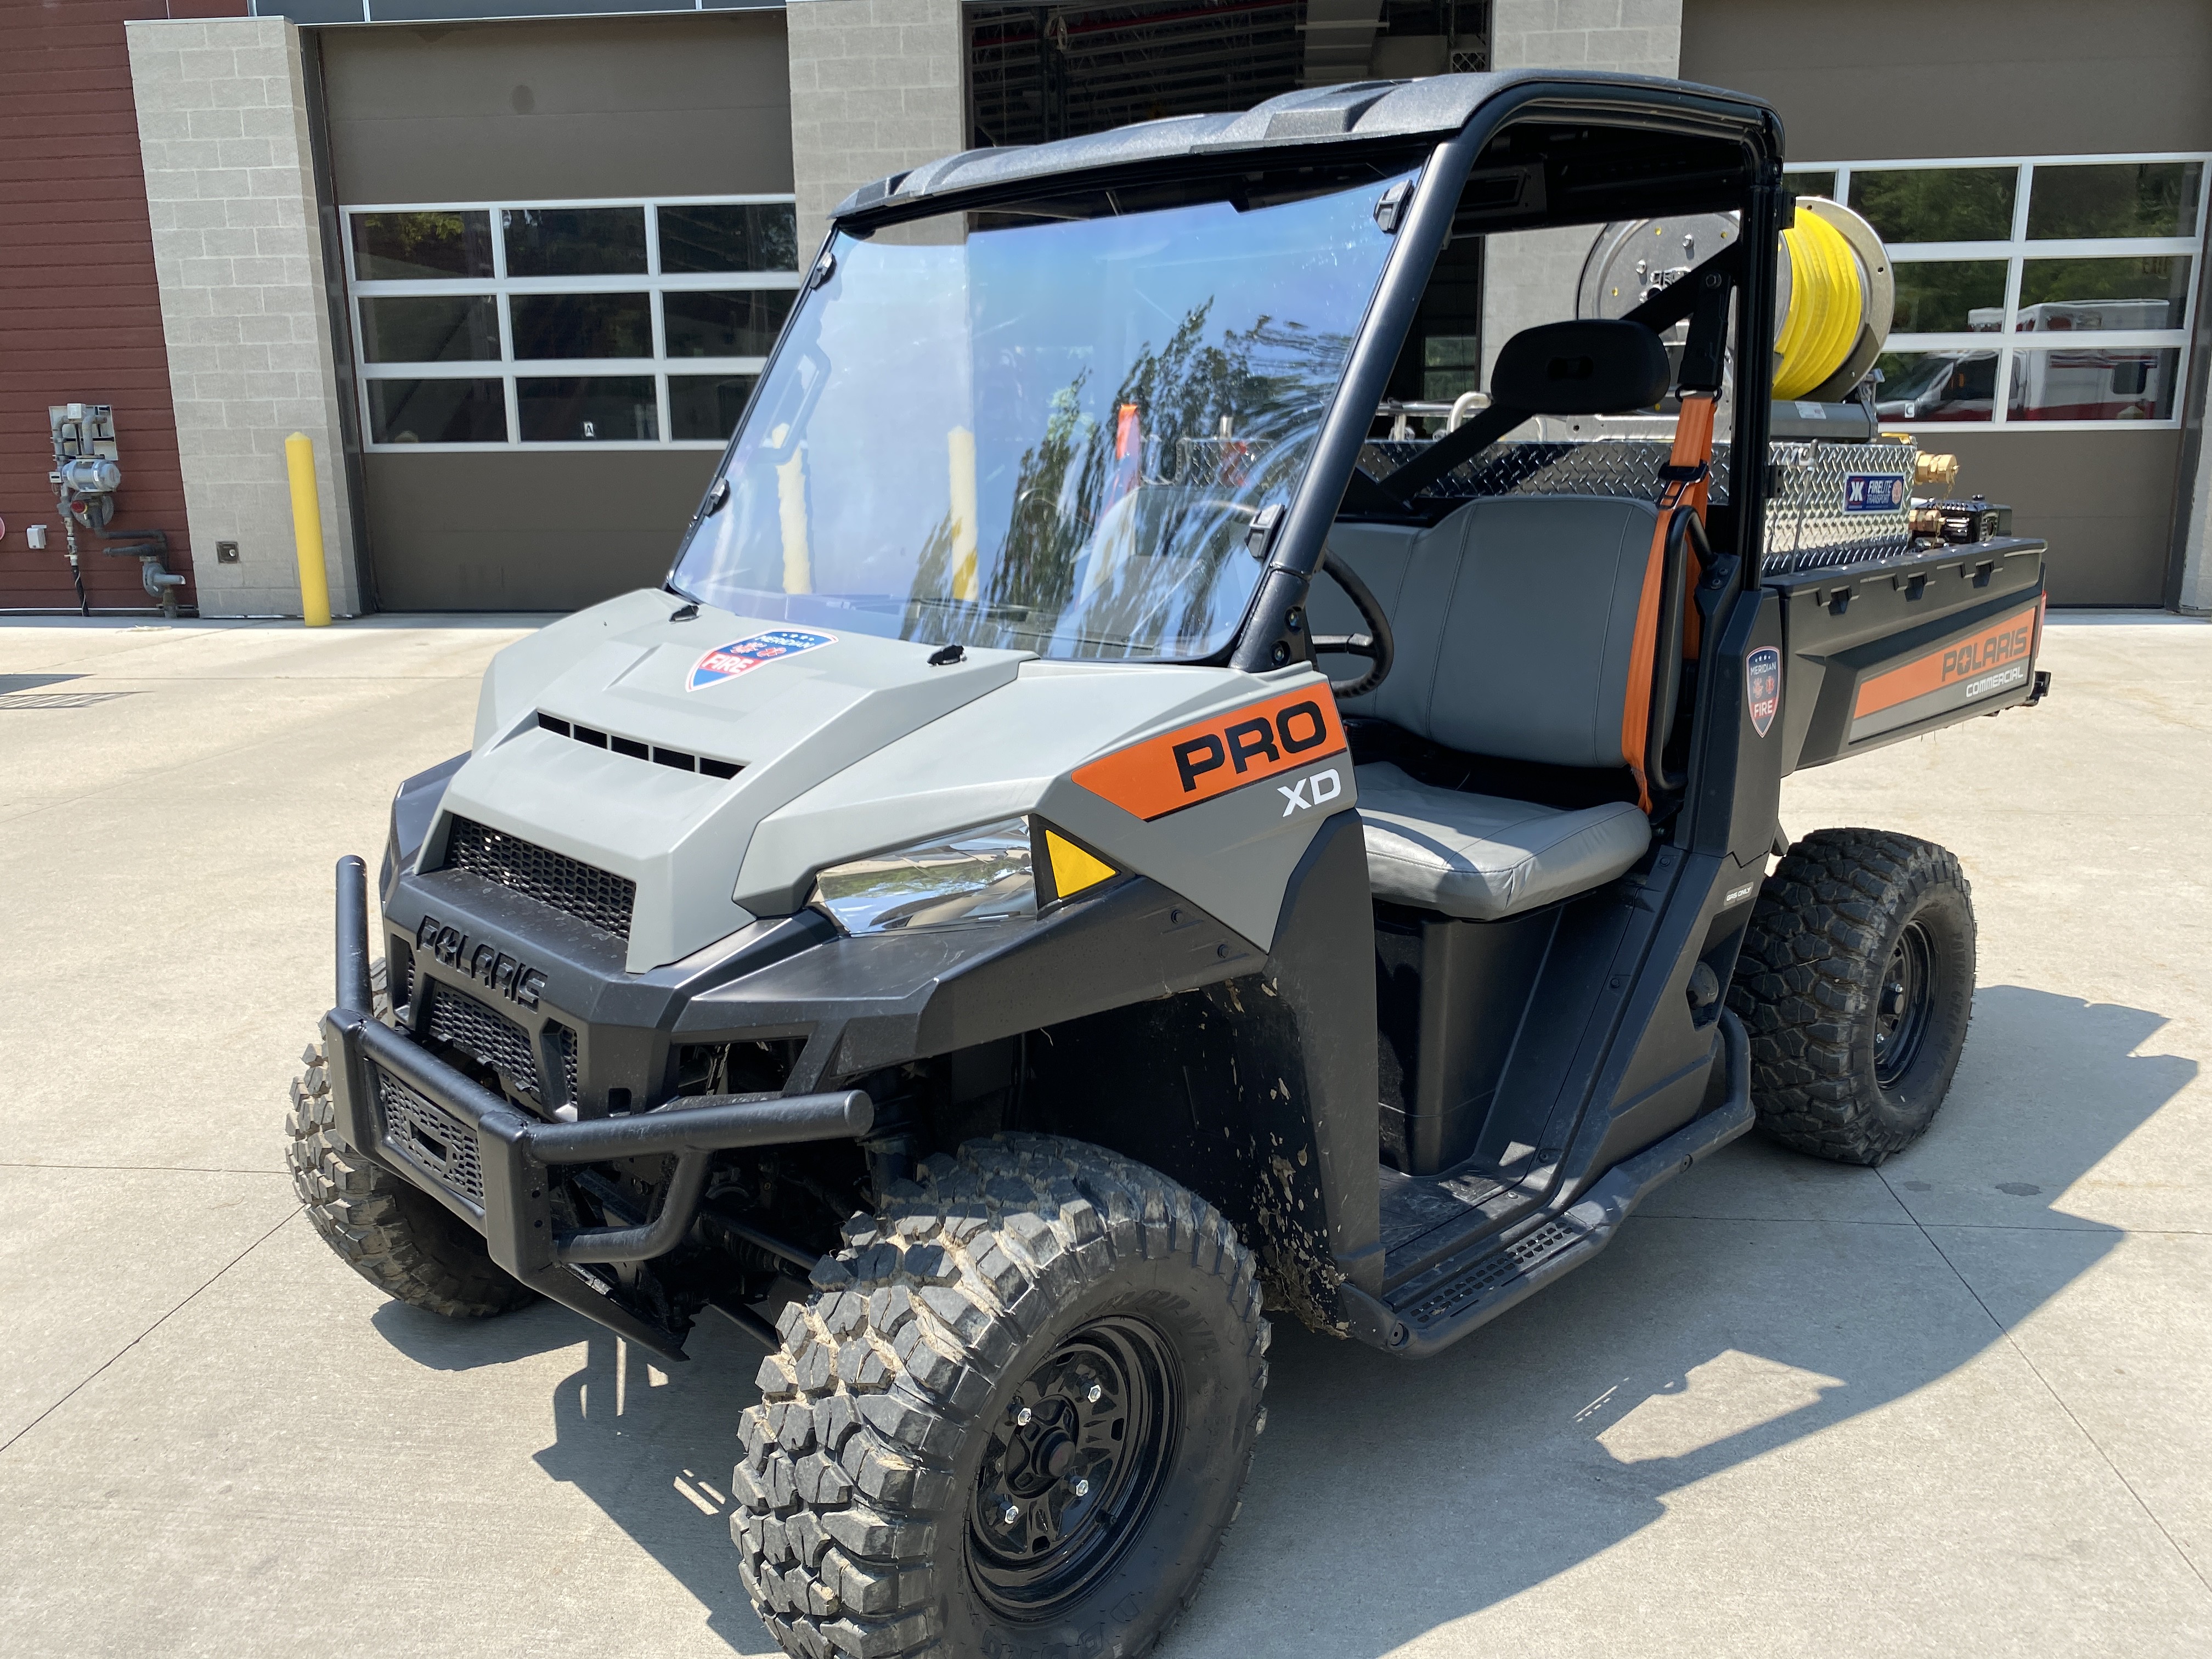 Meridian Township Fire Department Purchases New ATV To Save More Lives